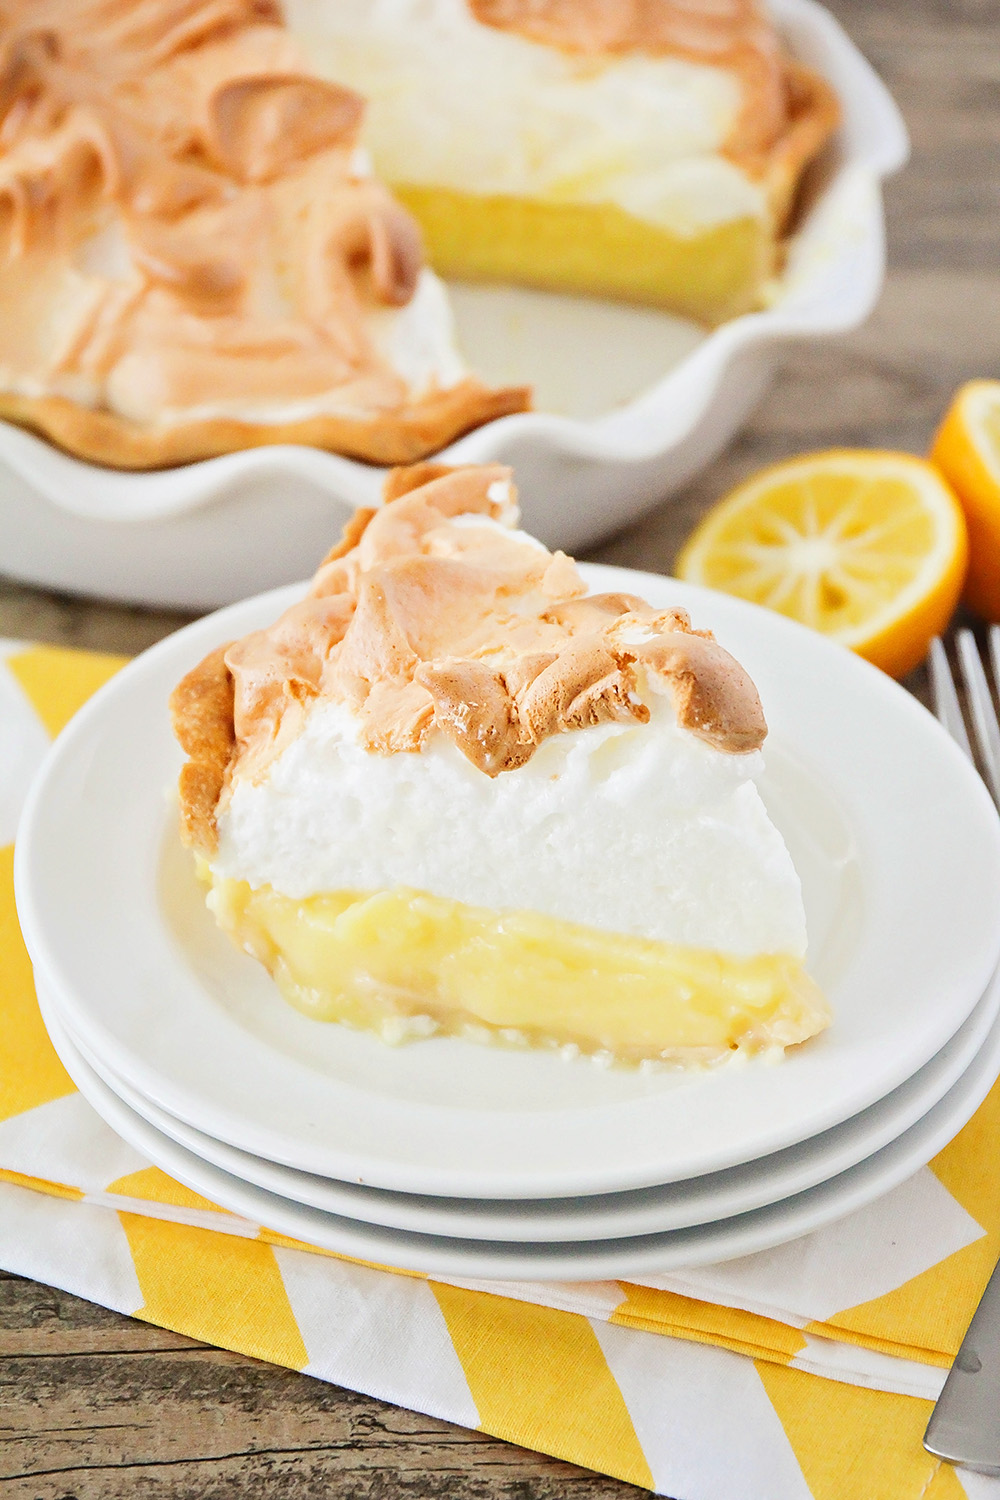 This lemon meringue pie is so heavenly and easy to make too! Deliciously tart and flavorful lemon custard topped with clouds of sweet fluffy meringue, for a show-stopping dessert!